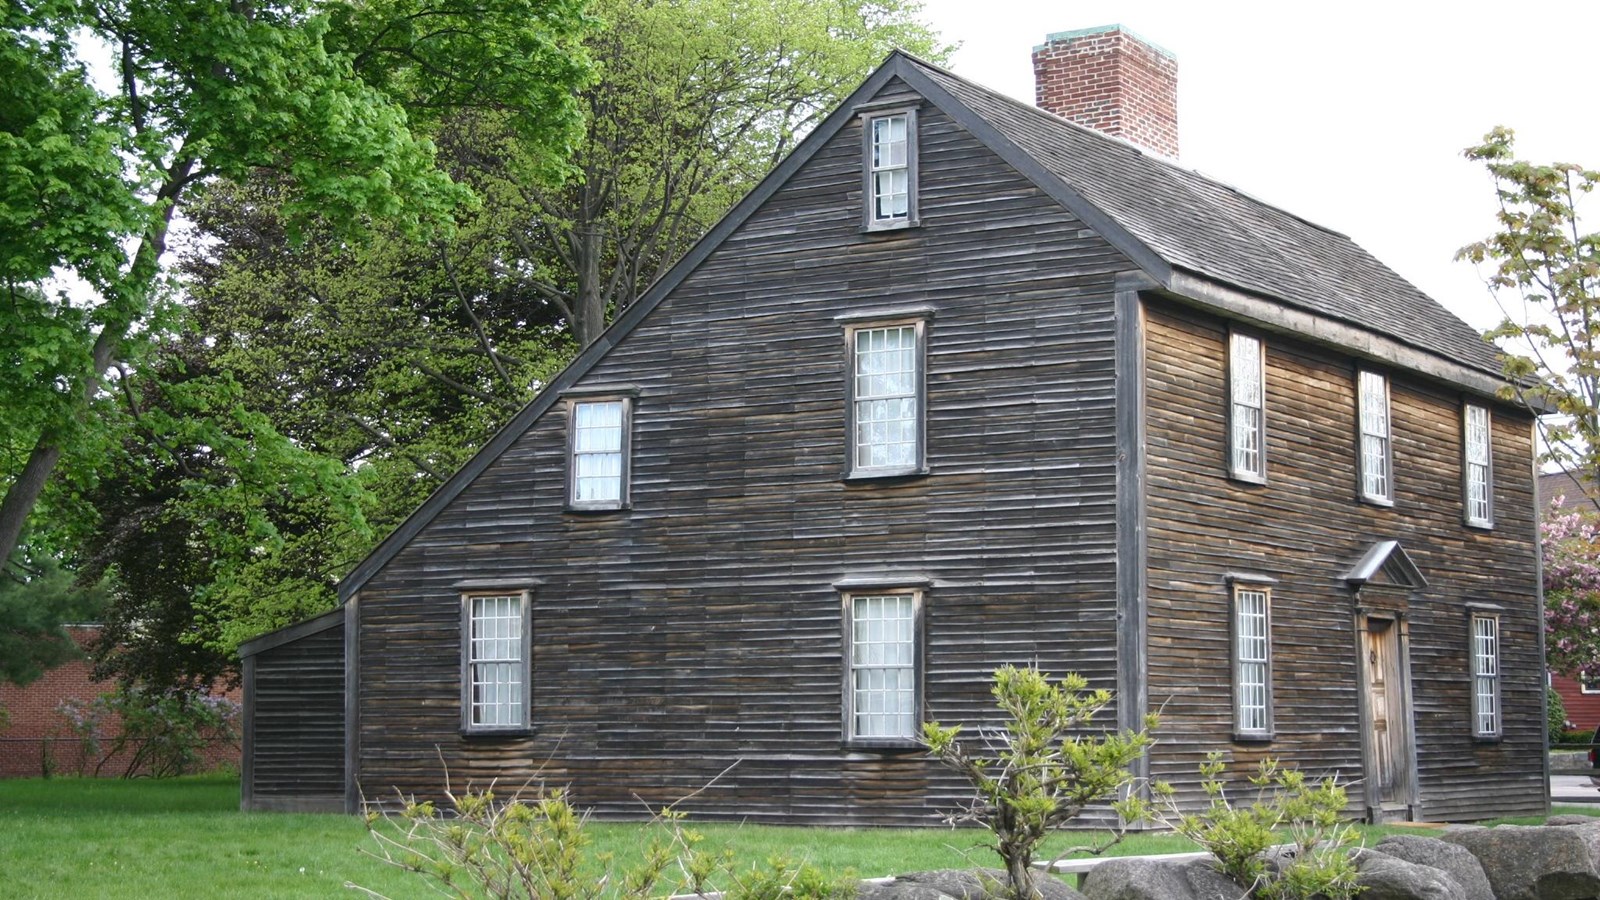 A brown saltbox style home with many windows and a chimney in the middle of the roof.